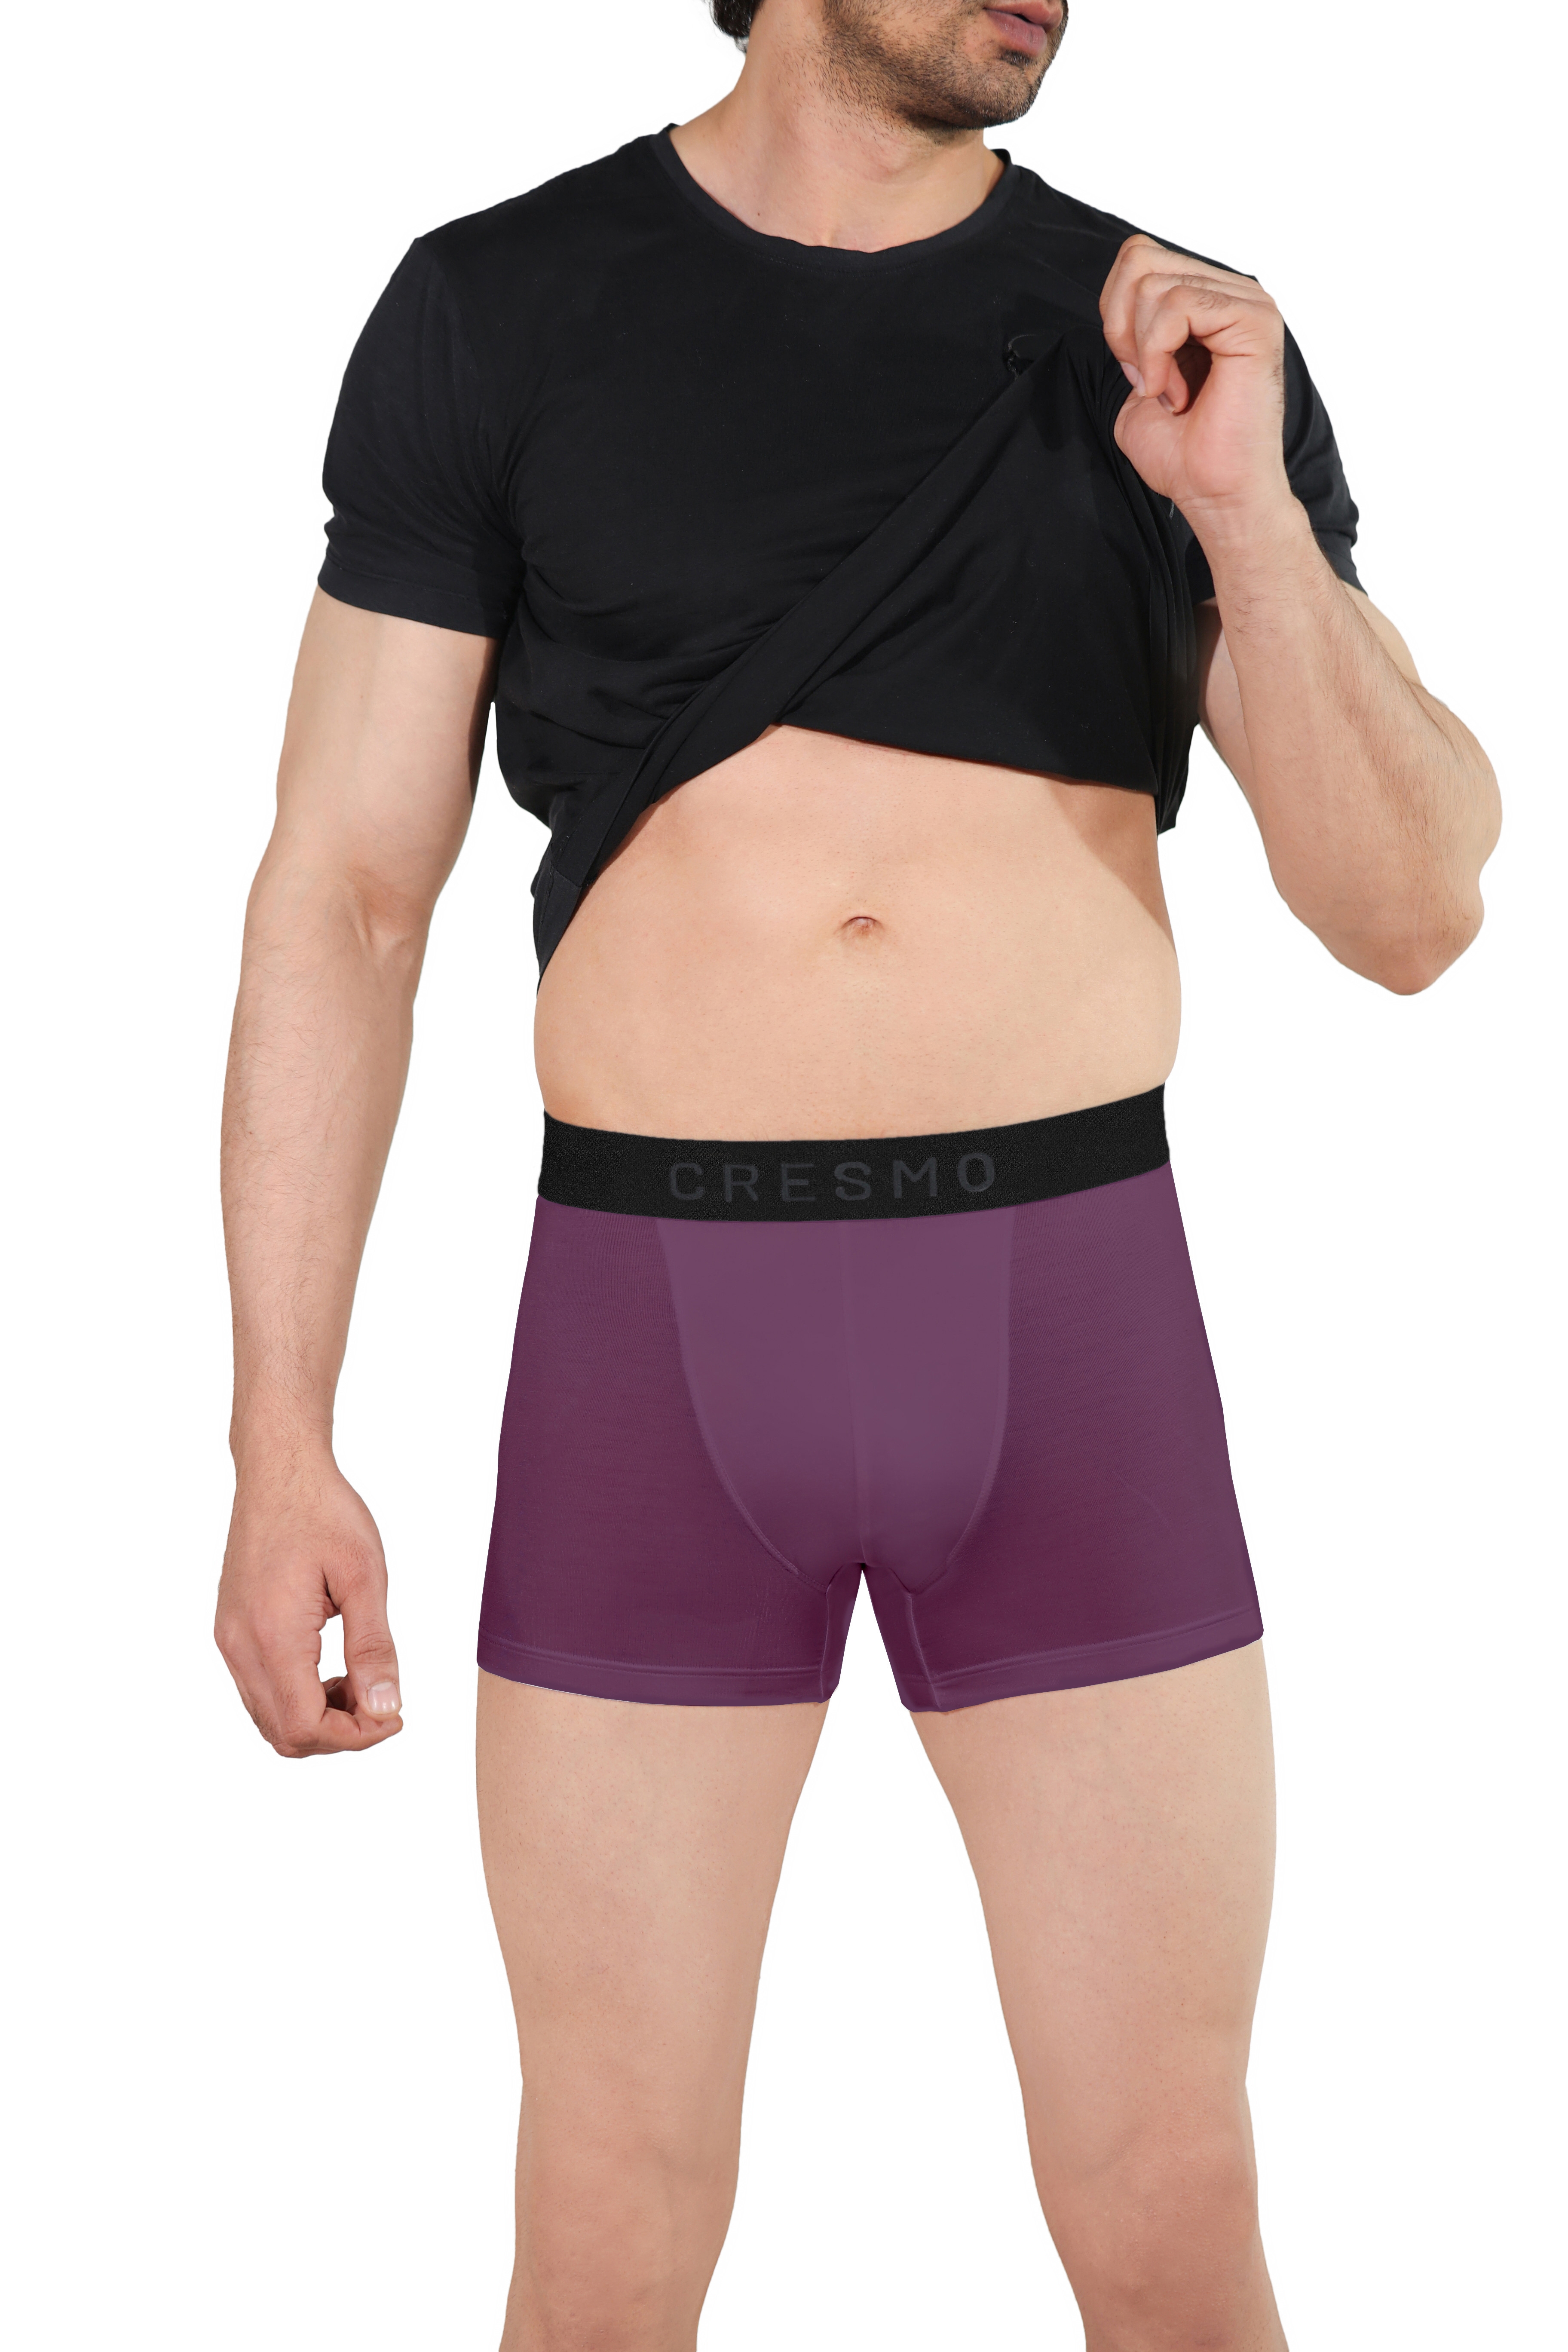 CRESMO | CRESMO Men's Anti-Microbial Micro Modal Underwear Breathable Ultra Soft Trunk (Pack of 3)